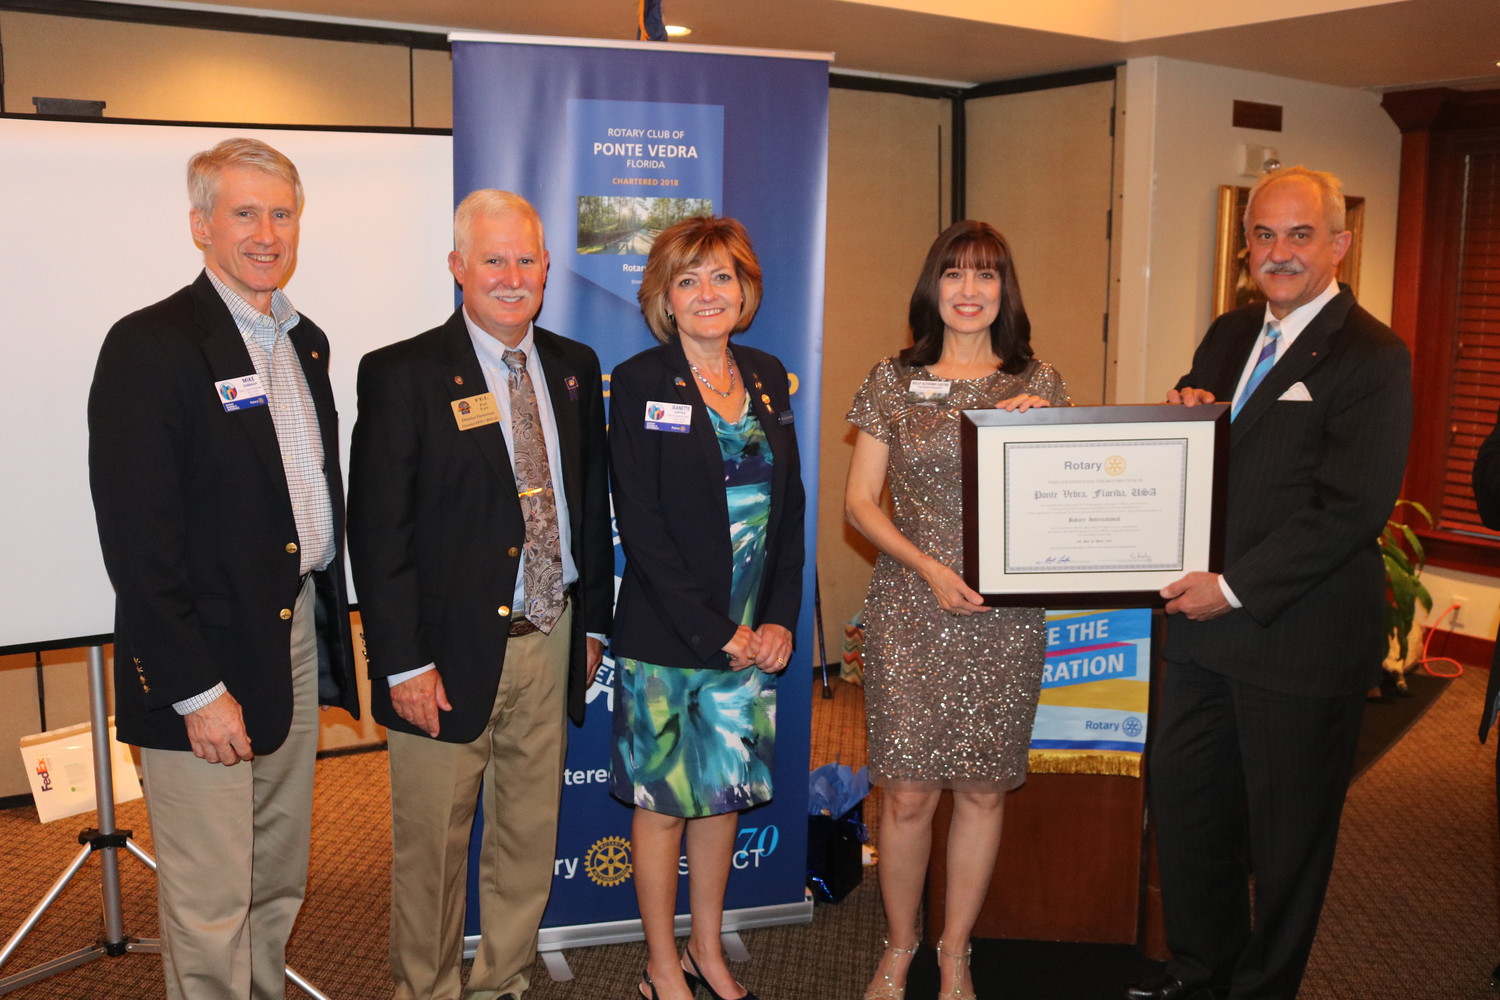 Rotary Club of Ponte Vedra President Kelly Altosino-Sastre (second from right) receives the official charter from Rotary International, presented by Rotary District 6970 Governor Nominee Mike Darragh (from left), Past District Governor Fel Lee, 2018-19 District Governor-Elect Jeanette Loftus and Rotary International Director David Stovall, at a special chartering ceremony held April 25 at Marsh Landing Country Club.